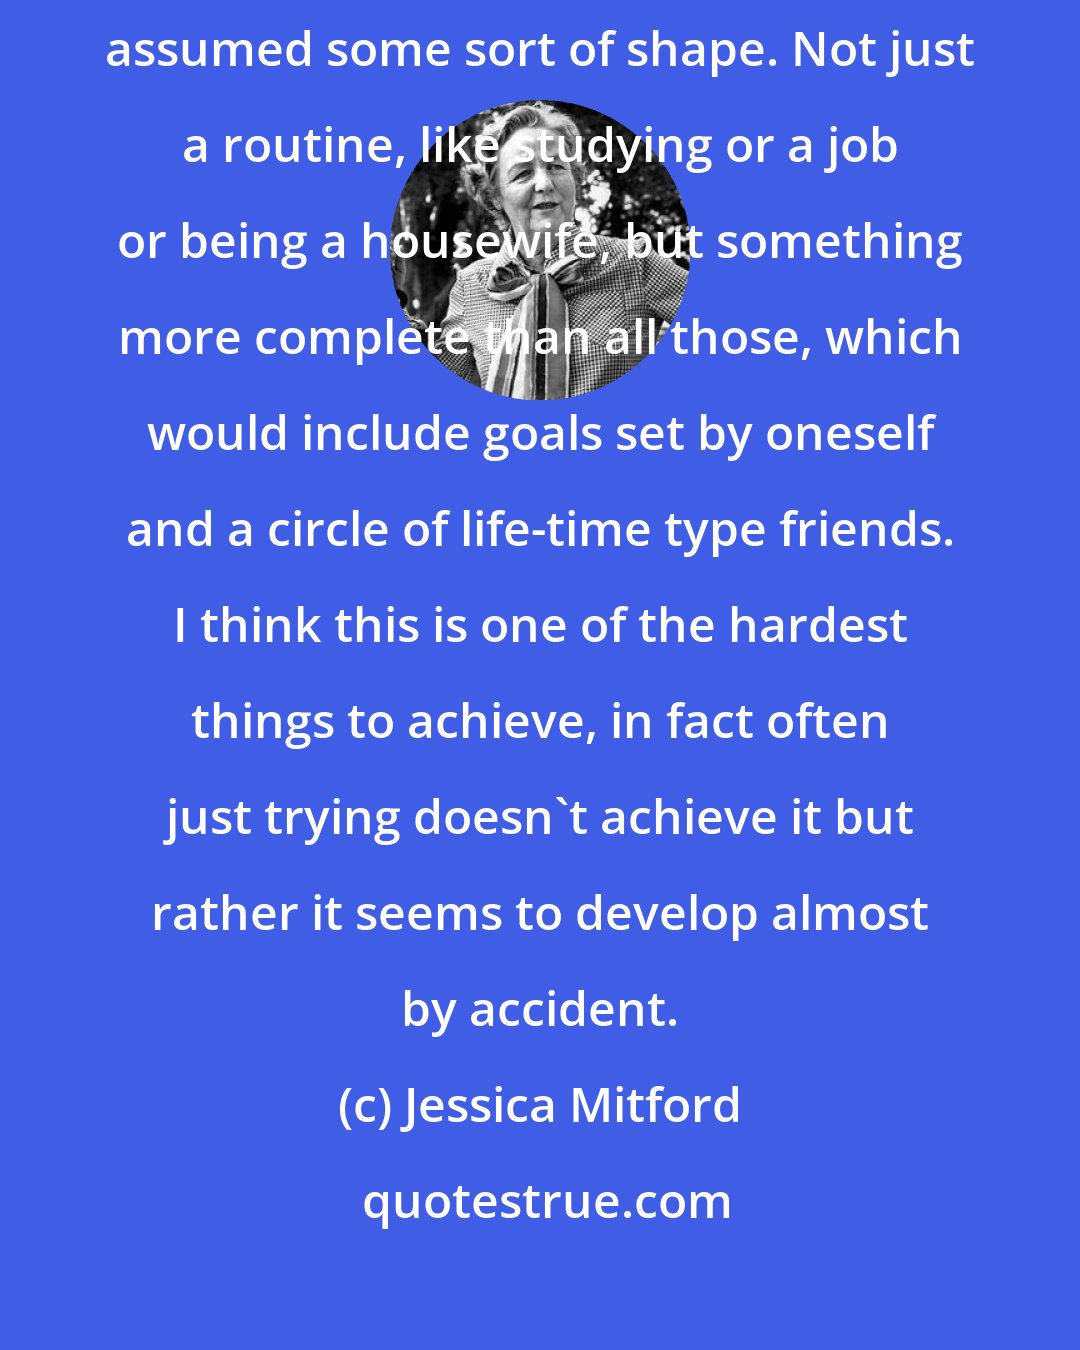 Jessica Mitford: One is only really inwardly comfortable, so to speak, after one's life has assumed some sort of shape. Not just a routine, like studying or a job or being a housewife, but something more complete than all those, which would include goals set by oneself and a circle of life-time type friends. I think this is one of the hardest things to achieve, in fact often just trying doesn't achieve it but rather it seems to develop almost by accident.